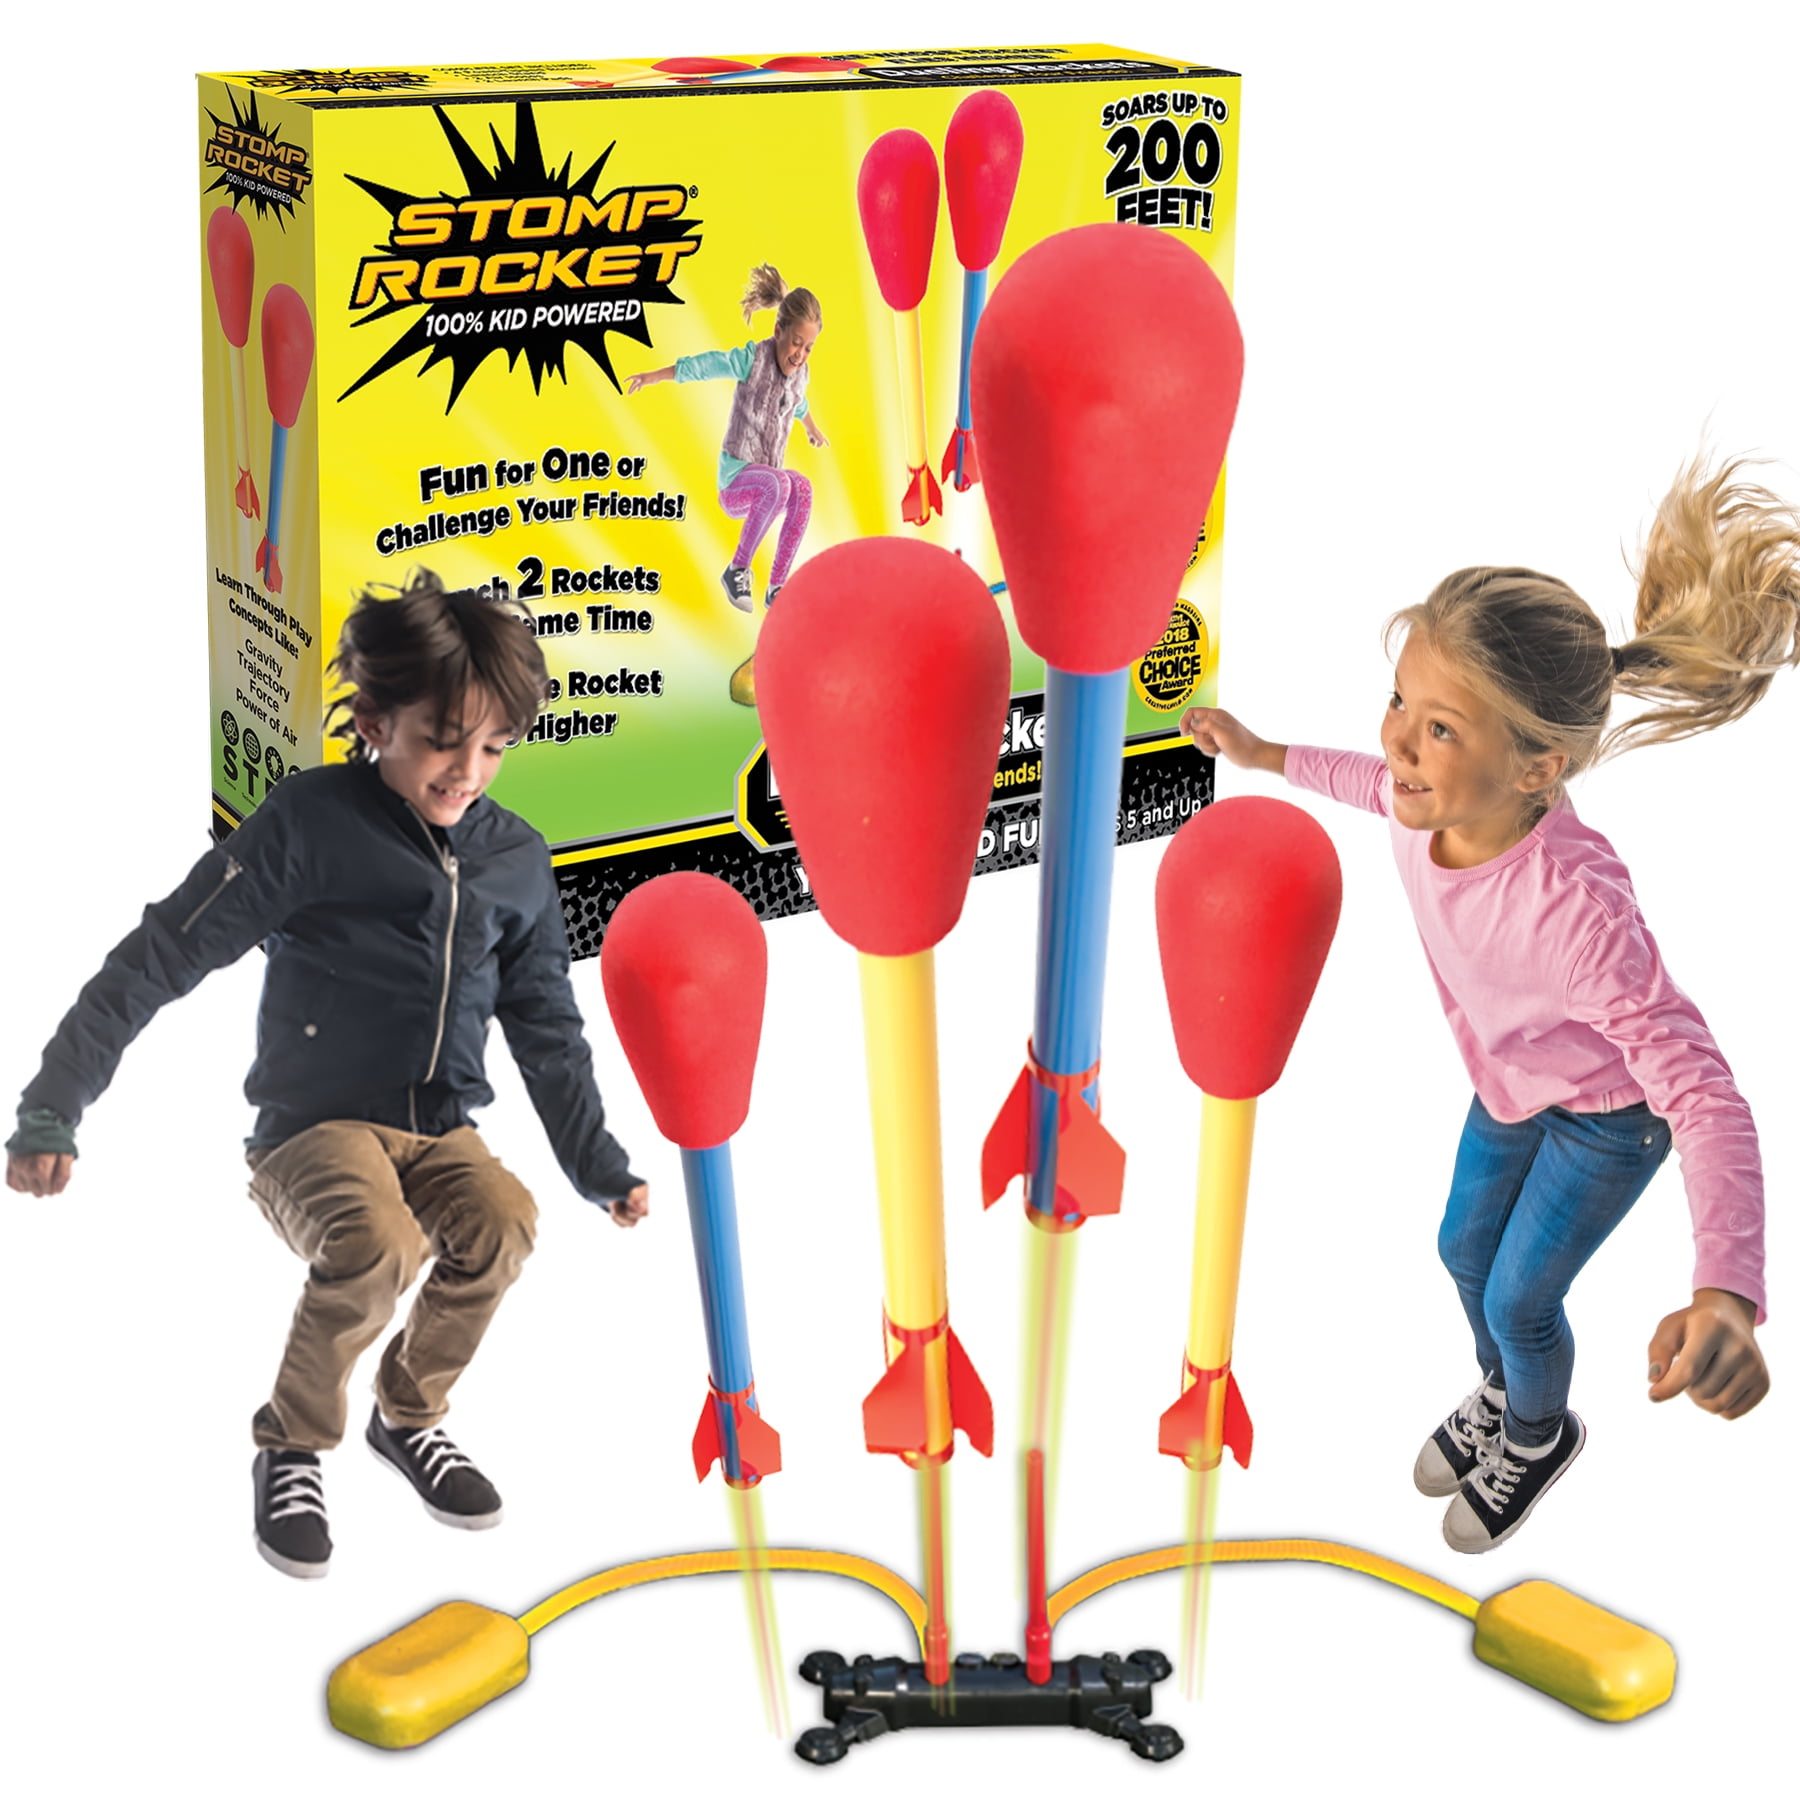 Squeeze Rocket 10 Pack Party Pack by Stomp Rocket 20555 